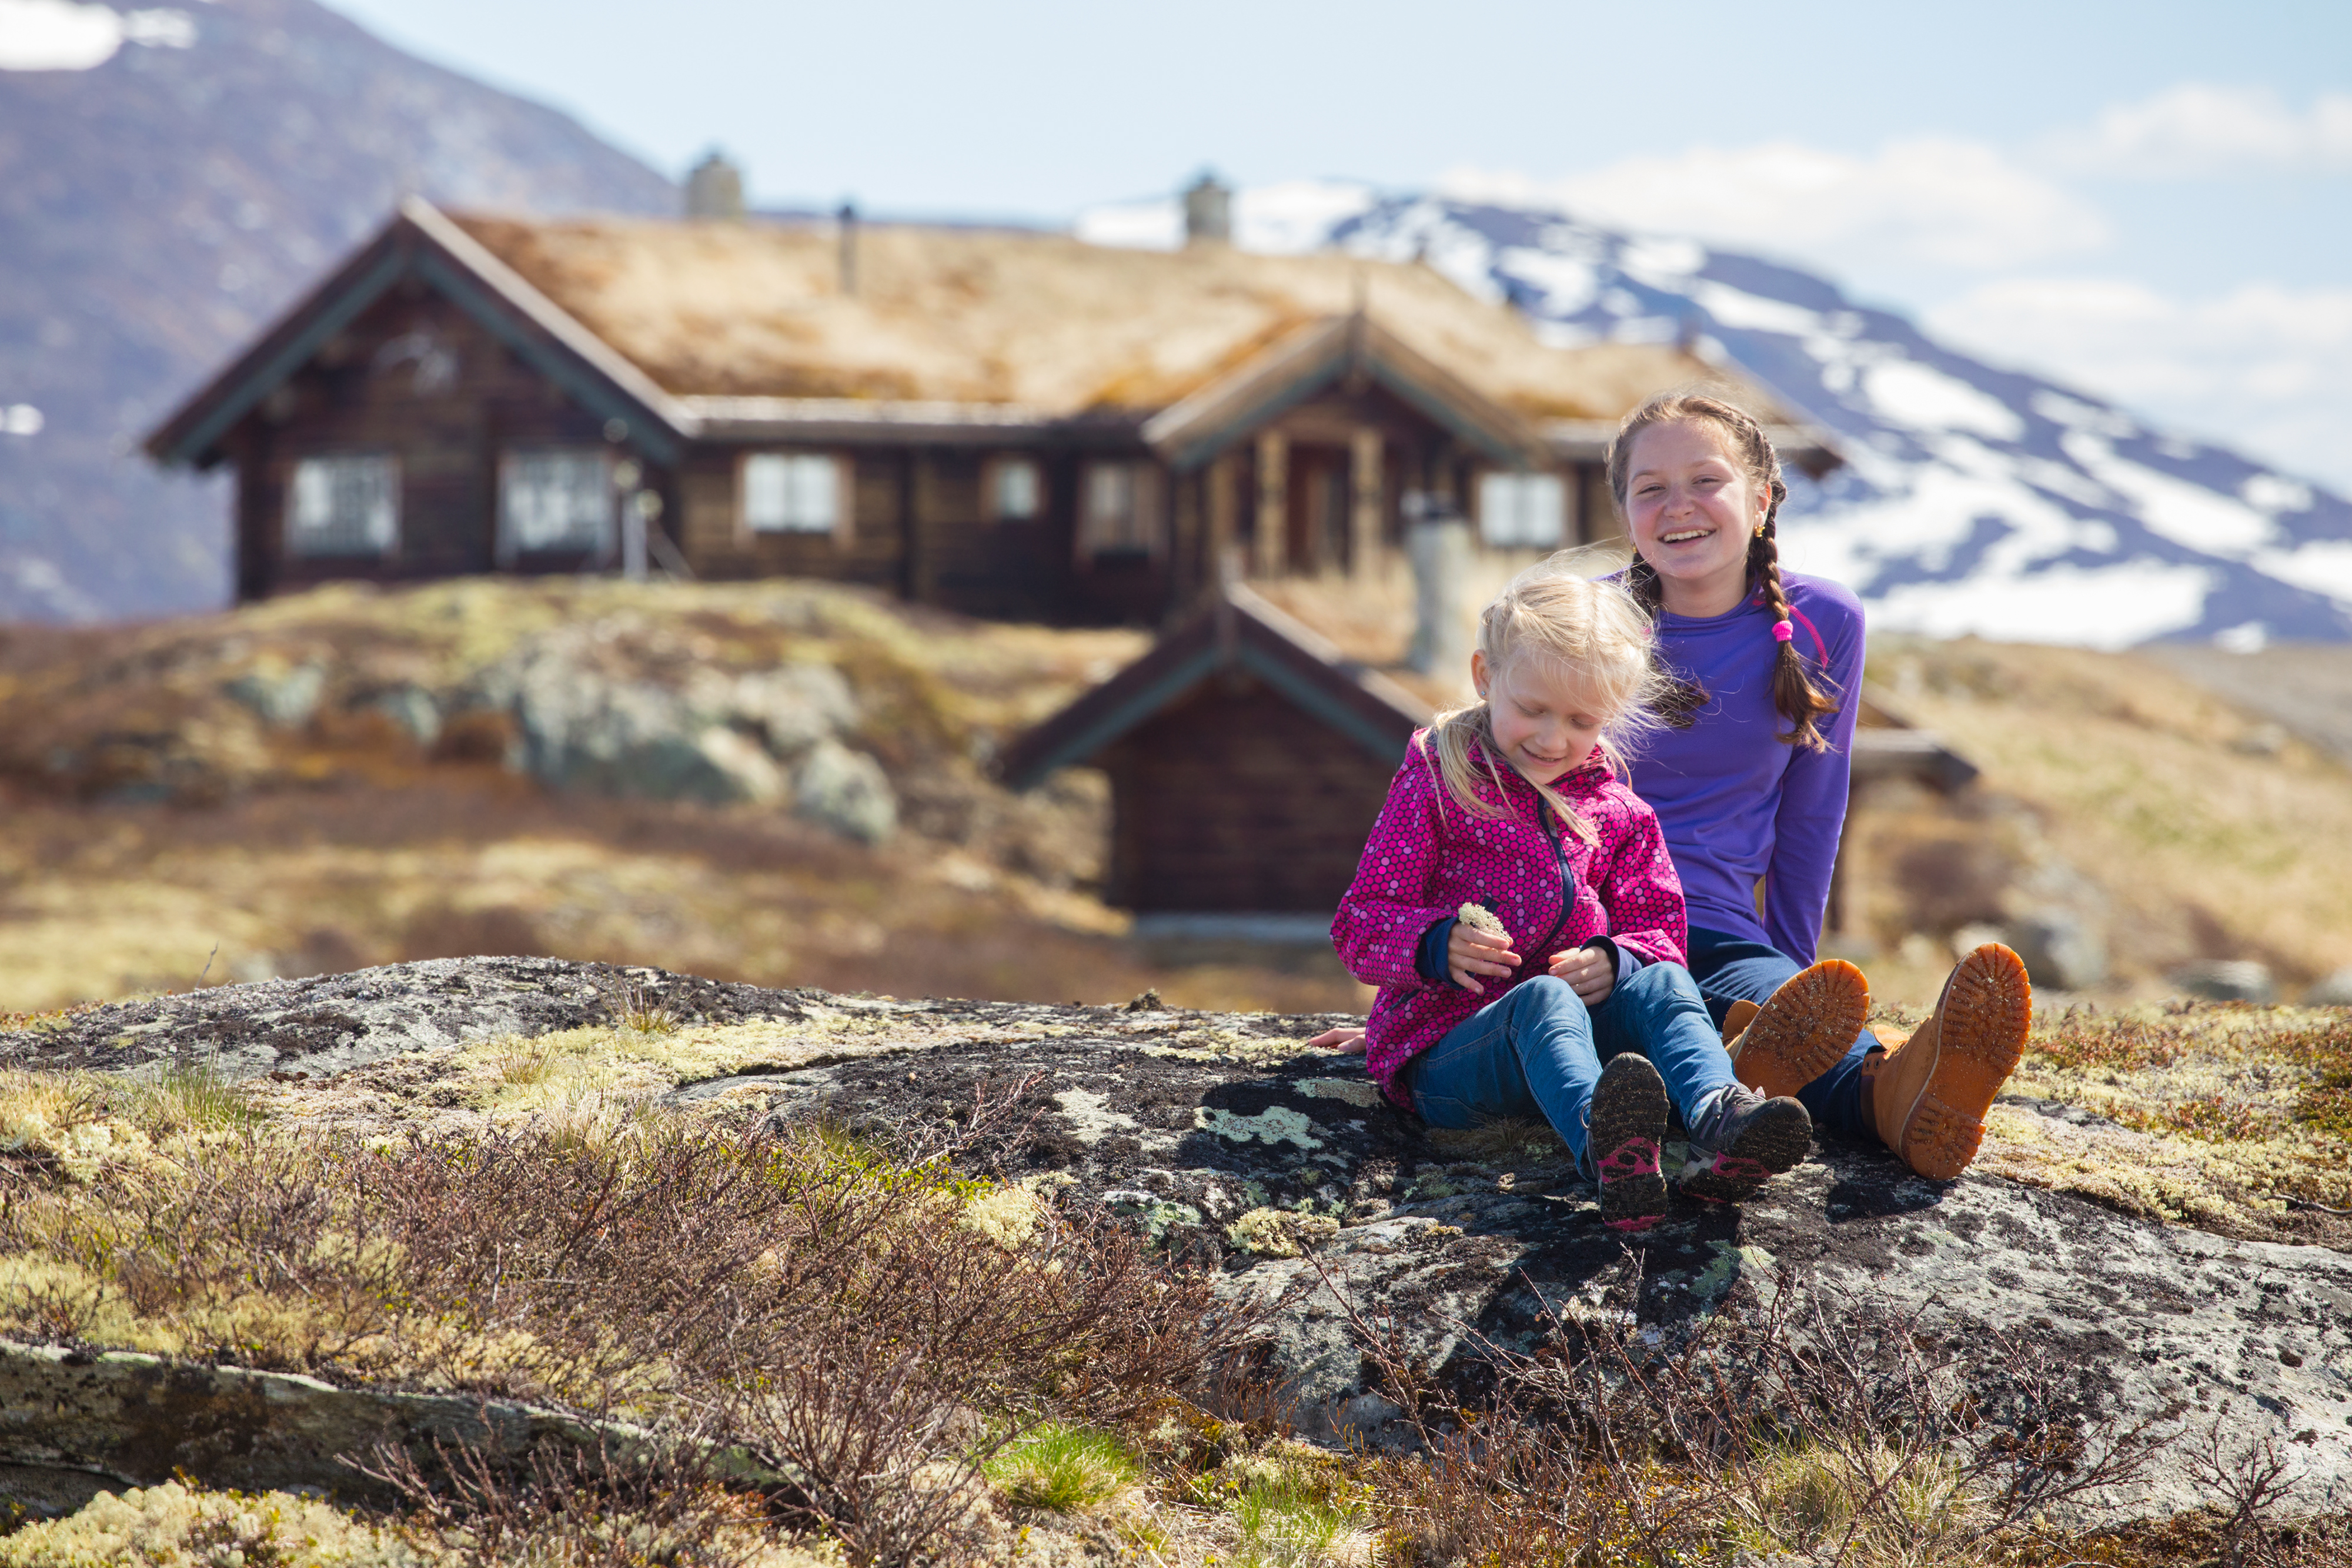 Young girls at home in Norway